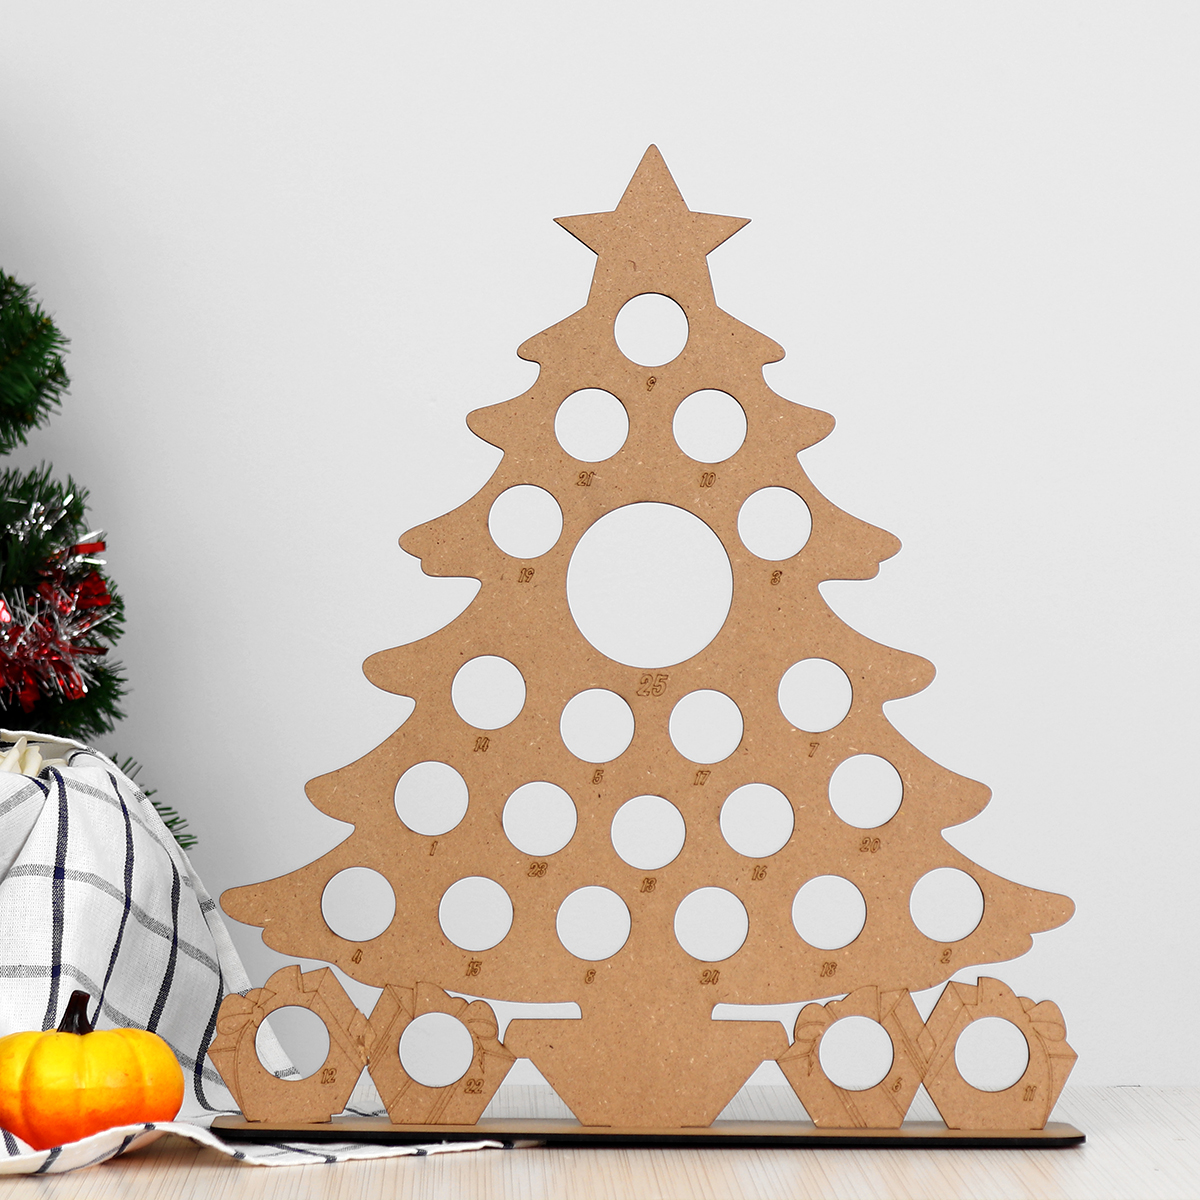 Wooden-Christmas-Advent-Calendar-Christmas-Tree-Decoration-Fits-25-Circular-Chocolates-Candy-Stand-R-1587861-2